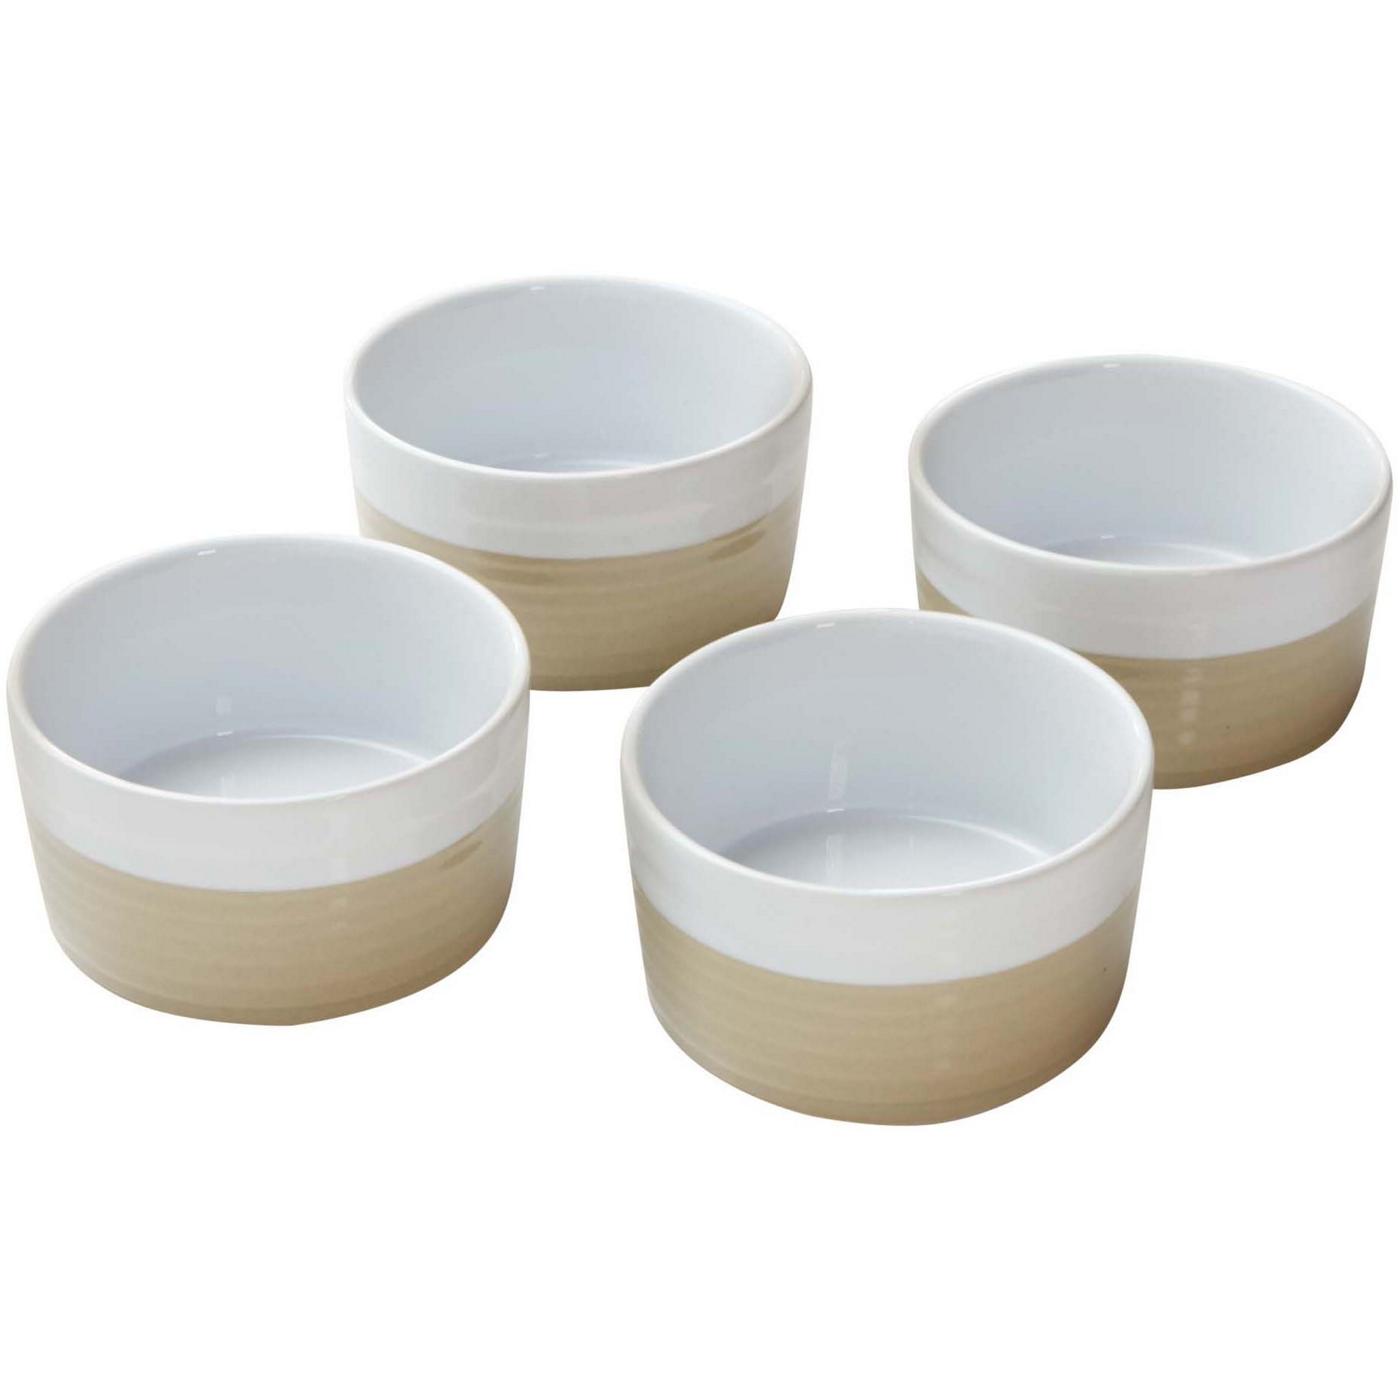 Kitchen & Table by H-E-B Bakeware Set - Shop Pans & Dishes at H-E-B